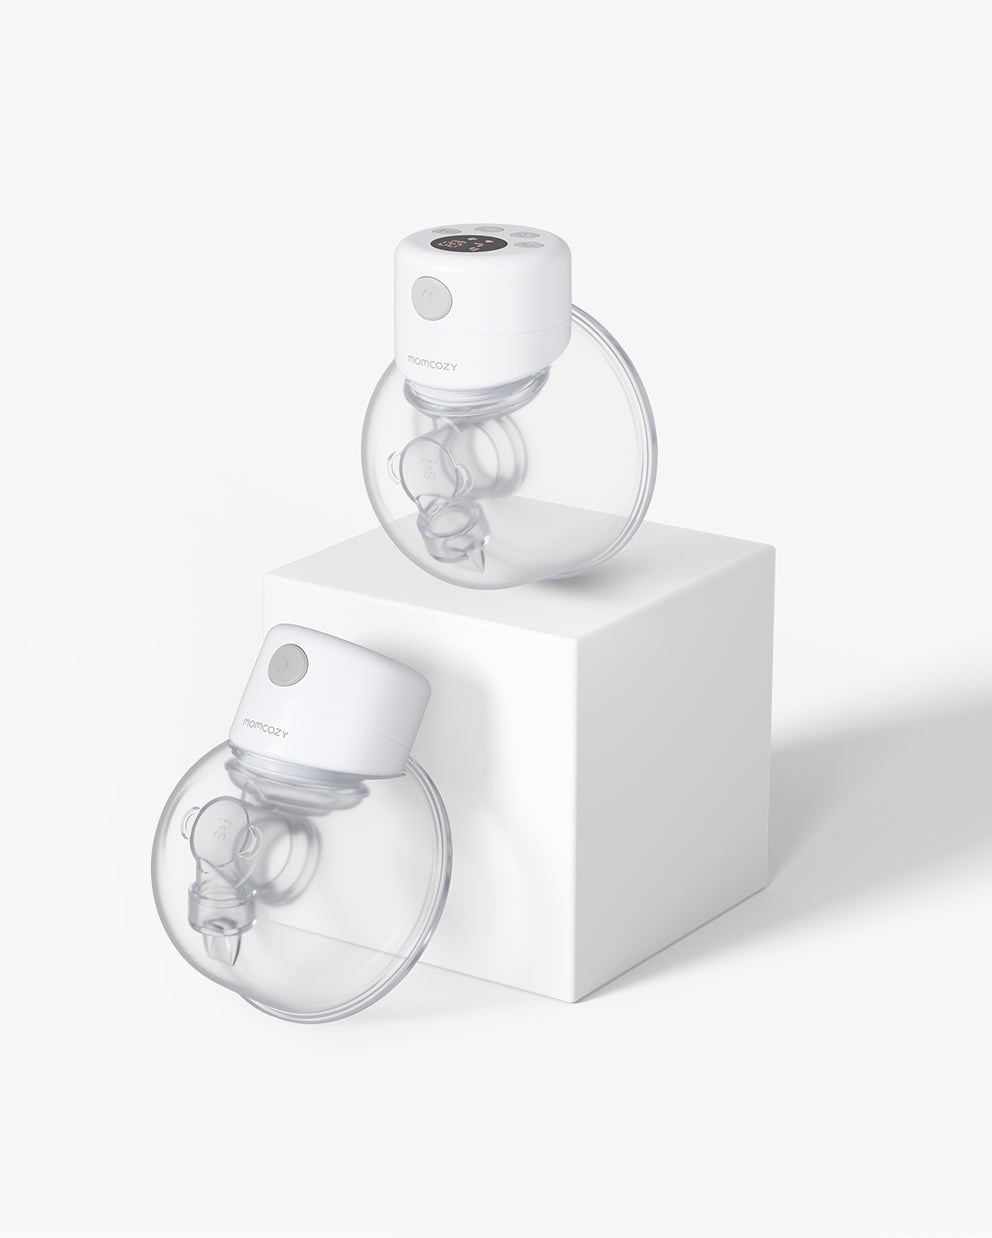 Momcozy M5 Wearable Breast Pump Review: The Perfect Pumping Option for